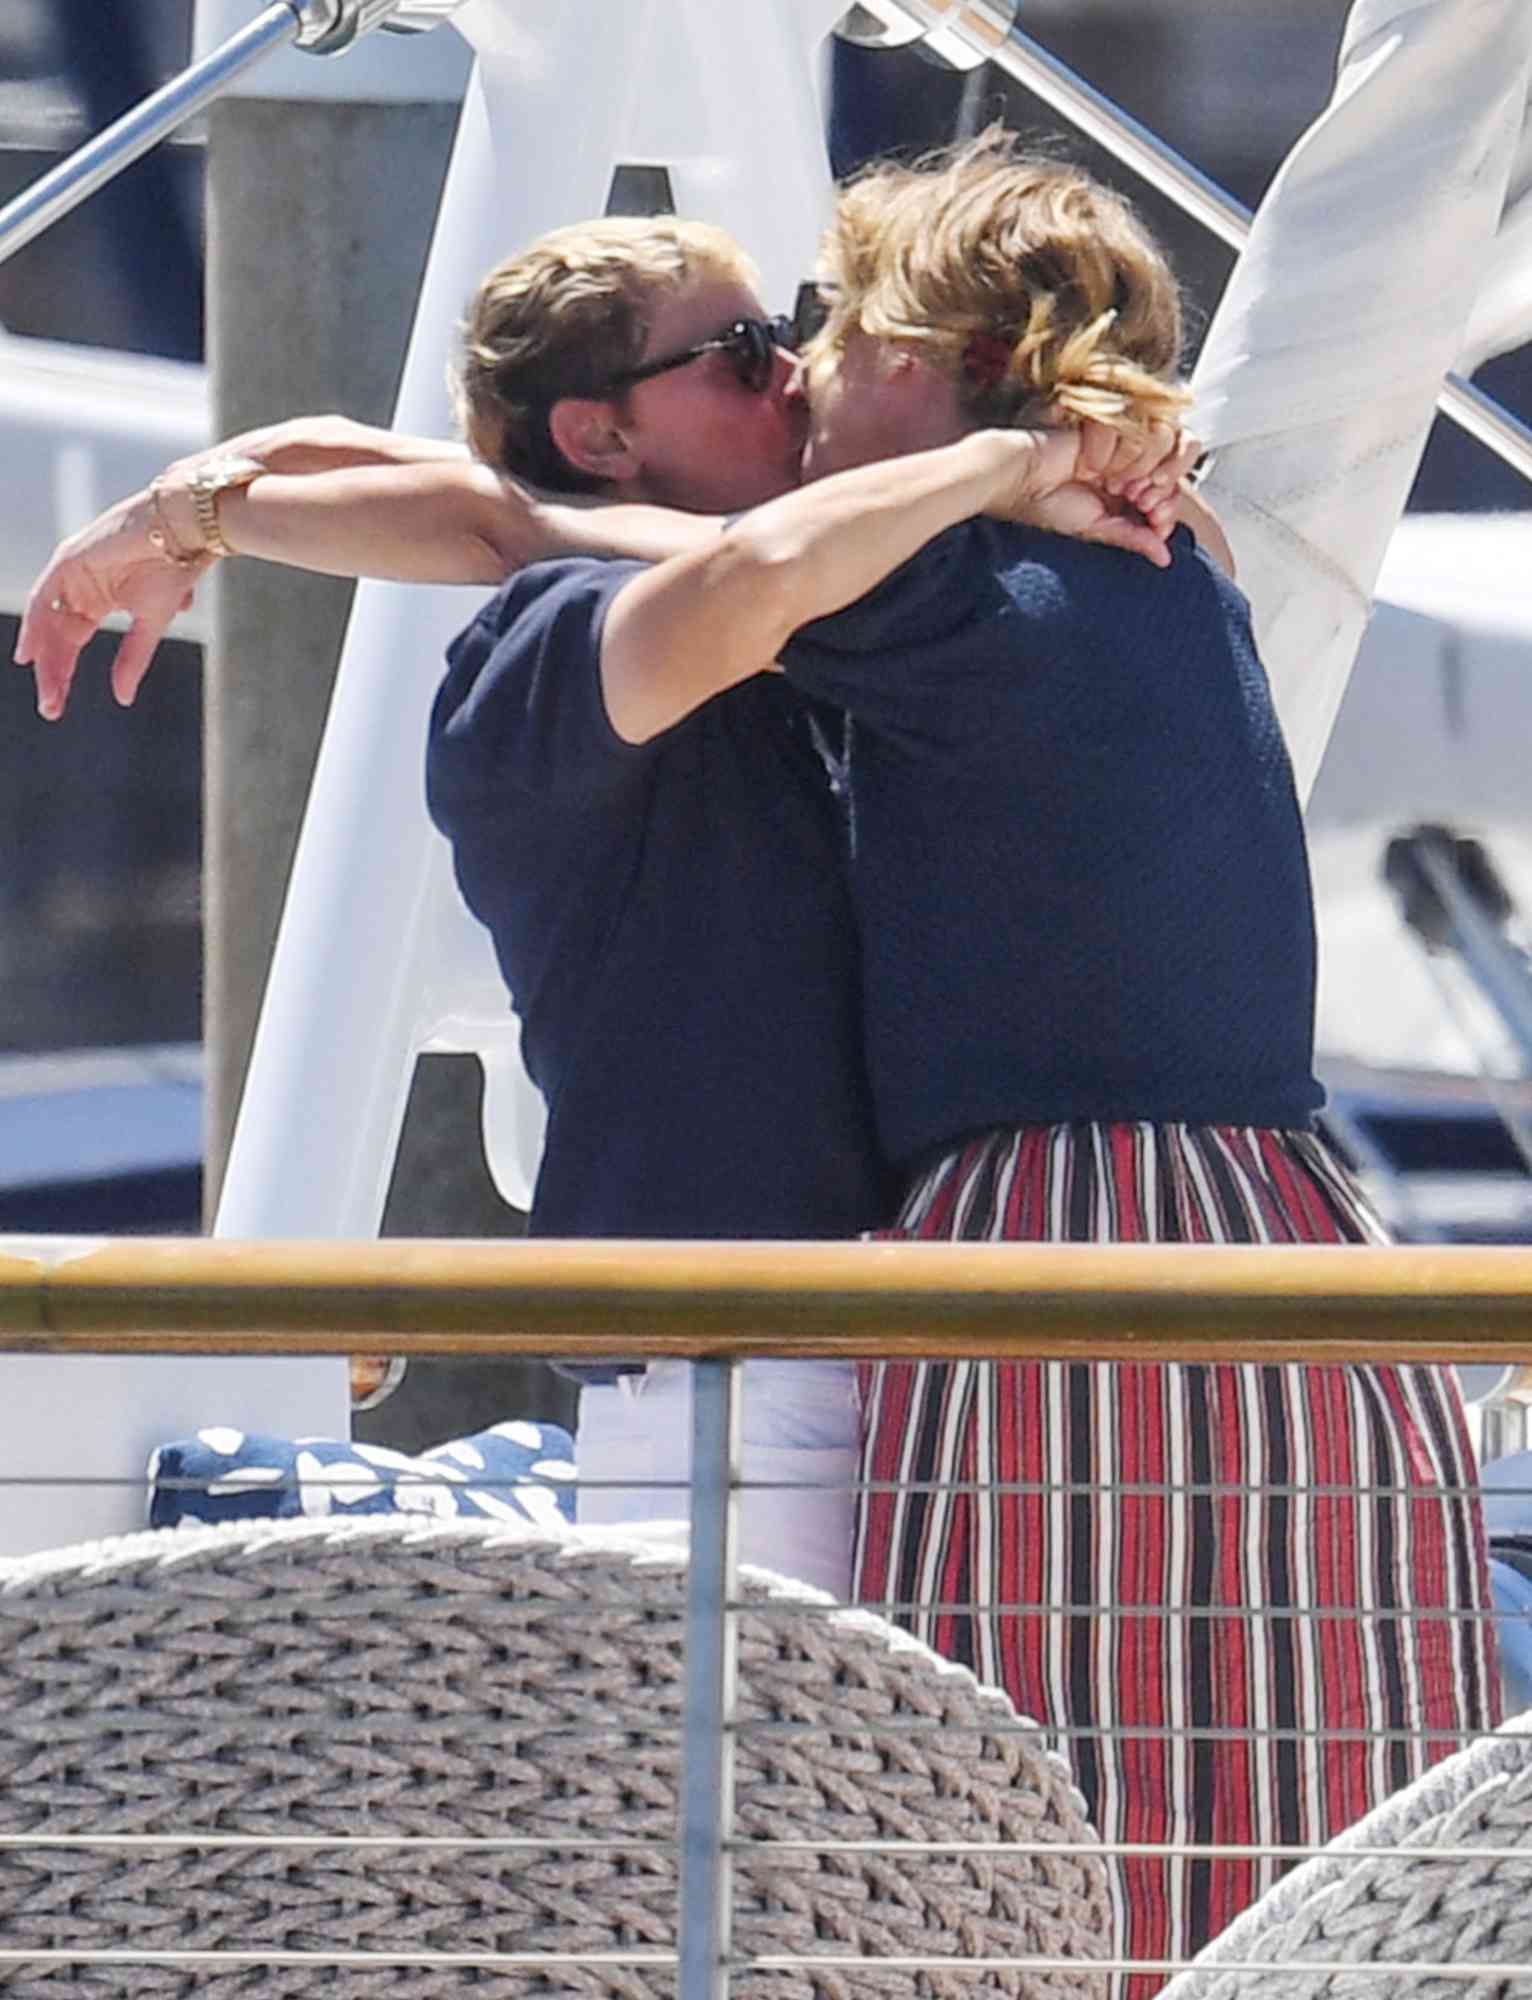 Ellen Degeneres and Portia DeRossi can't keep their hands off each other while kissing on a 40-foot catamaran yacht celebrating their 15th wedding anniversary in Santa Barbara harbor on Wednesday